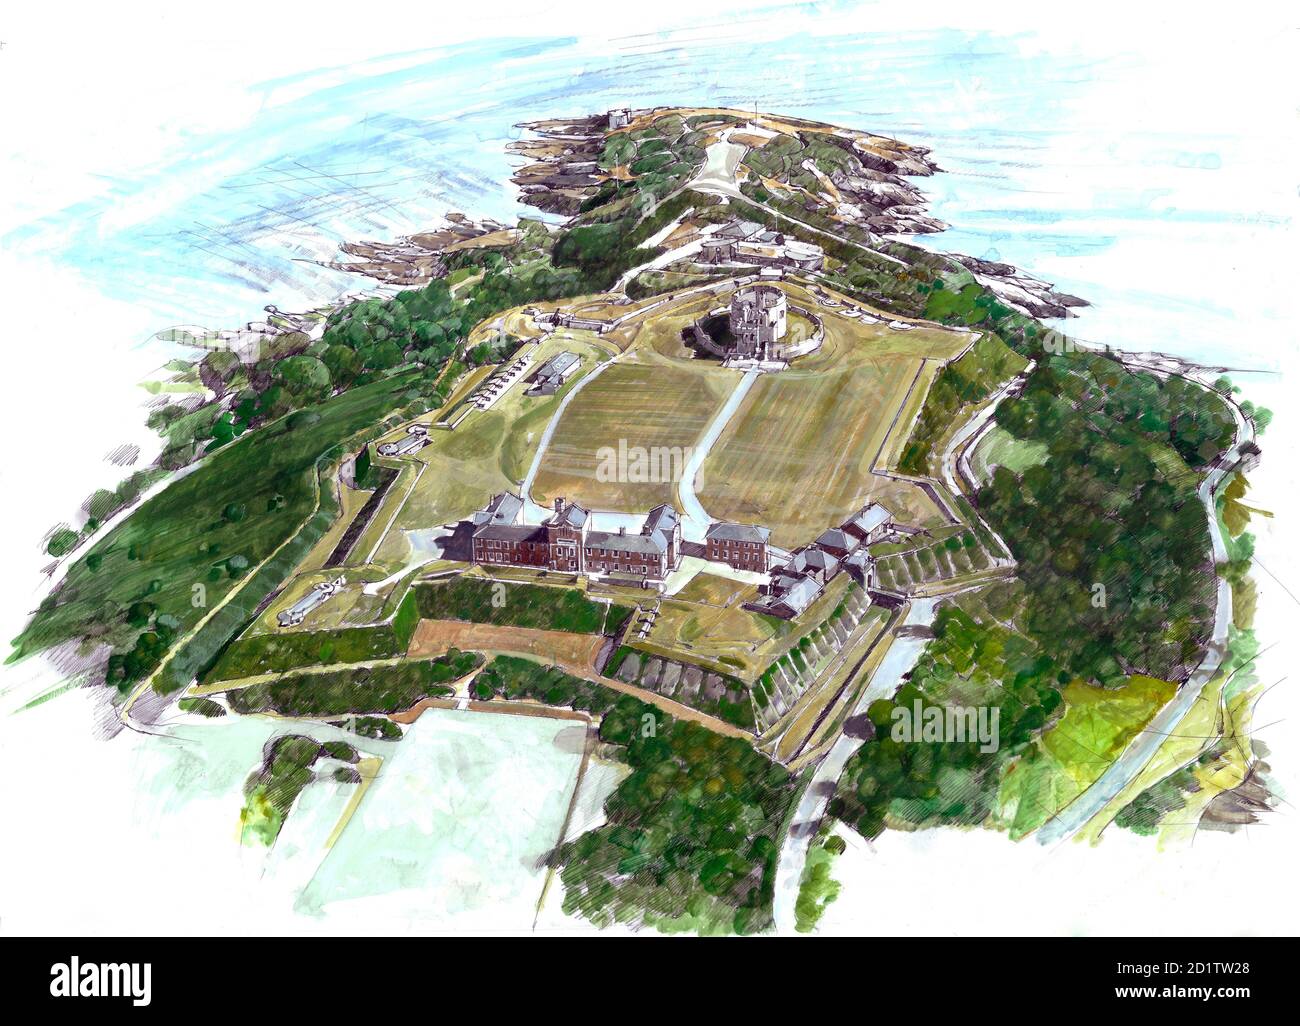 PENDENNIS CASTLE, Falmouth, Cornwall. Aerial reconstruction painting by Ivan Lapper of the Tudor, Elizabethan and later fortress as it appears today. Stock Photo